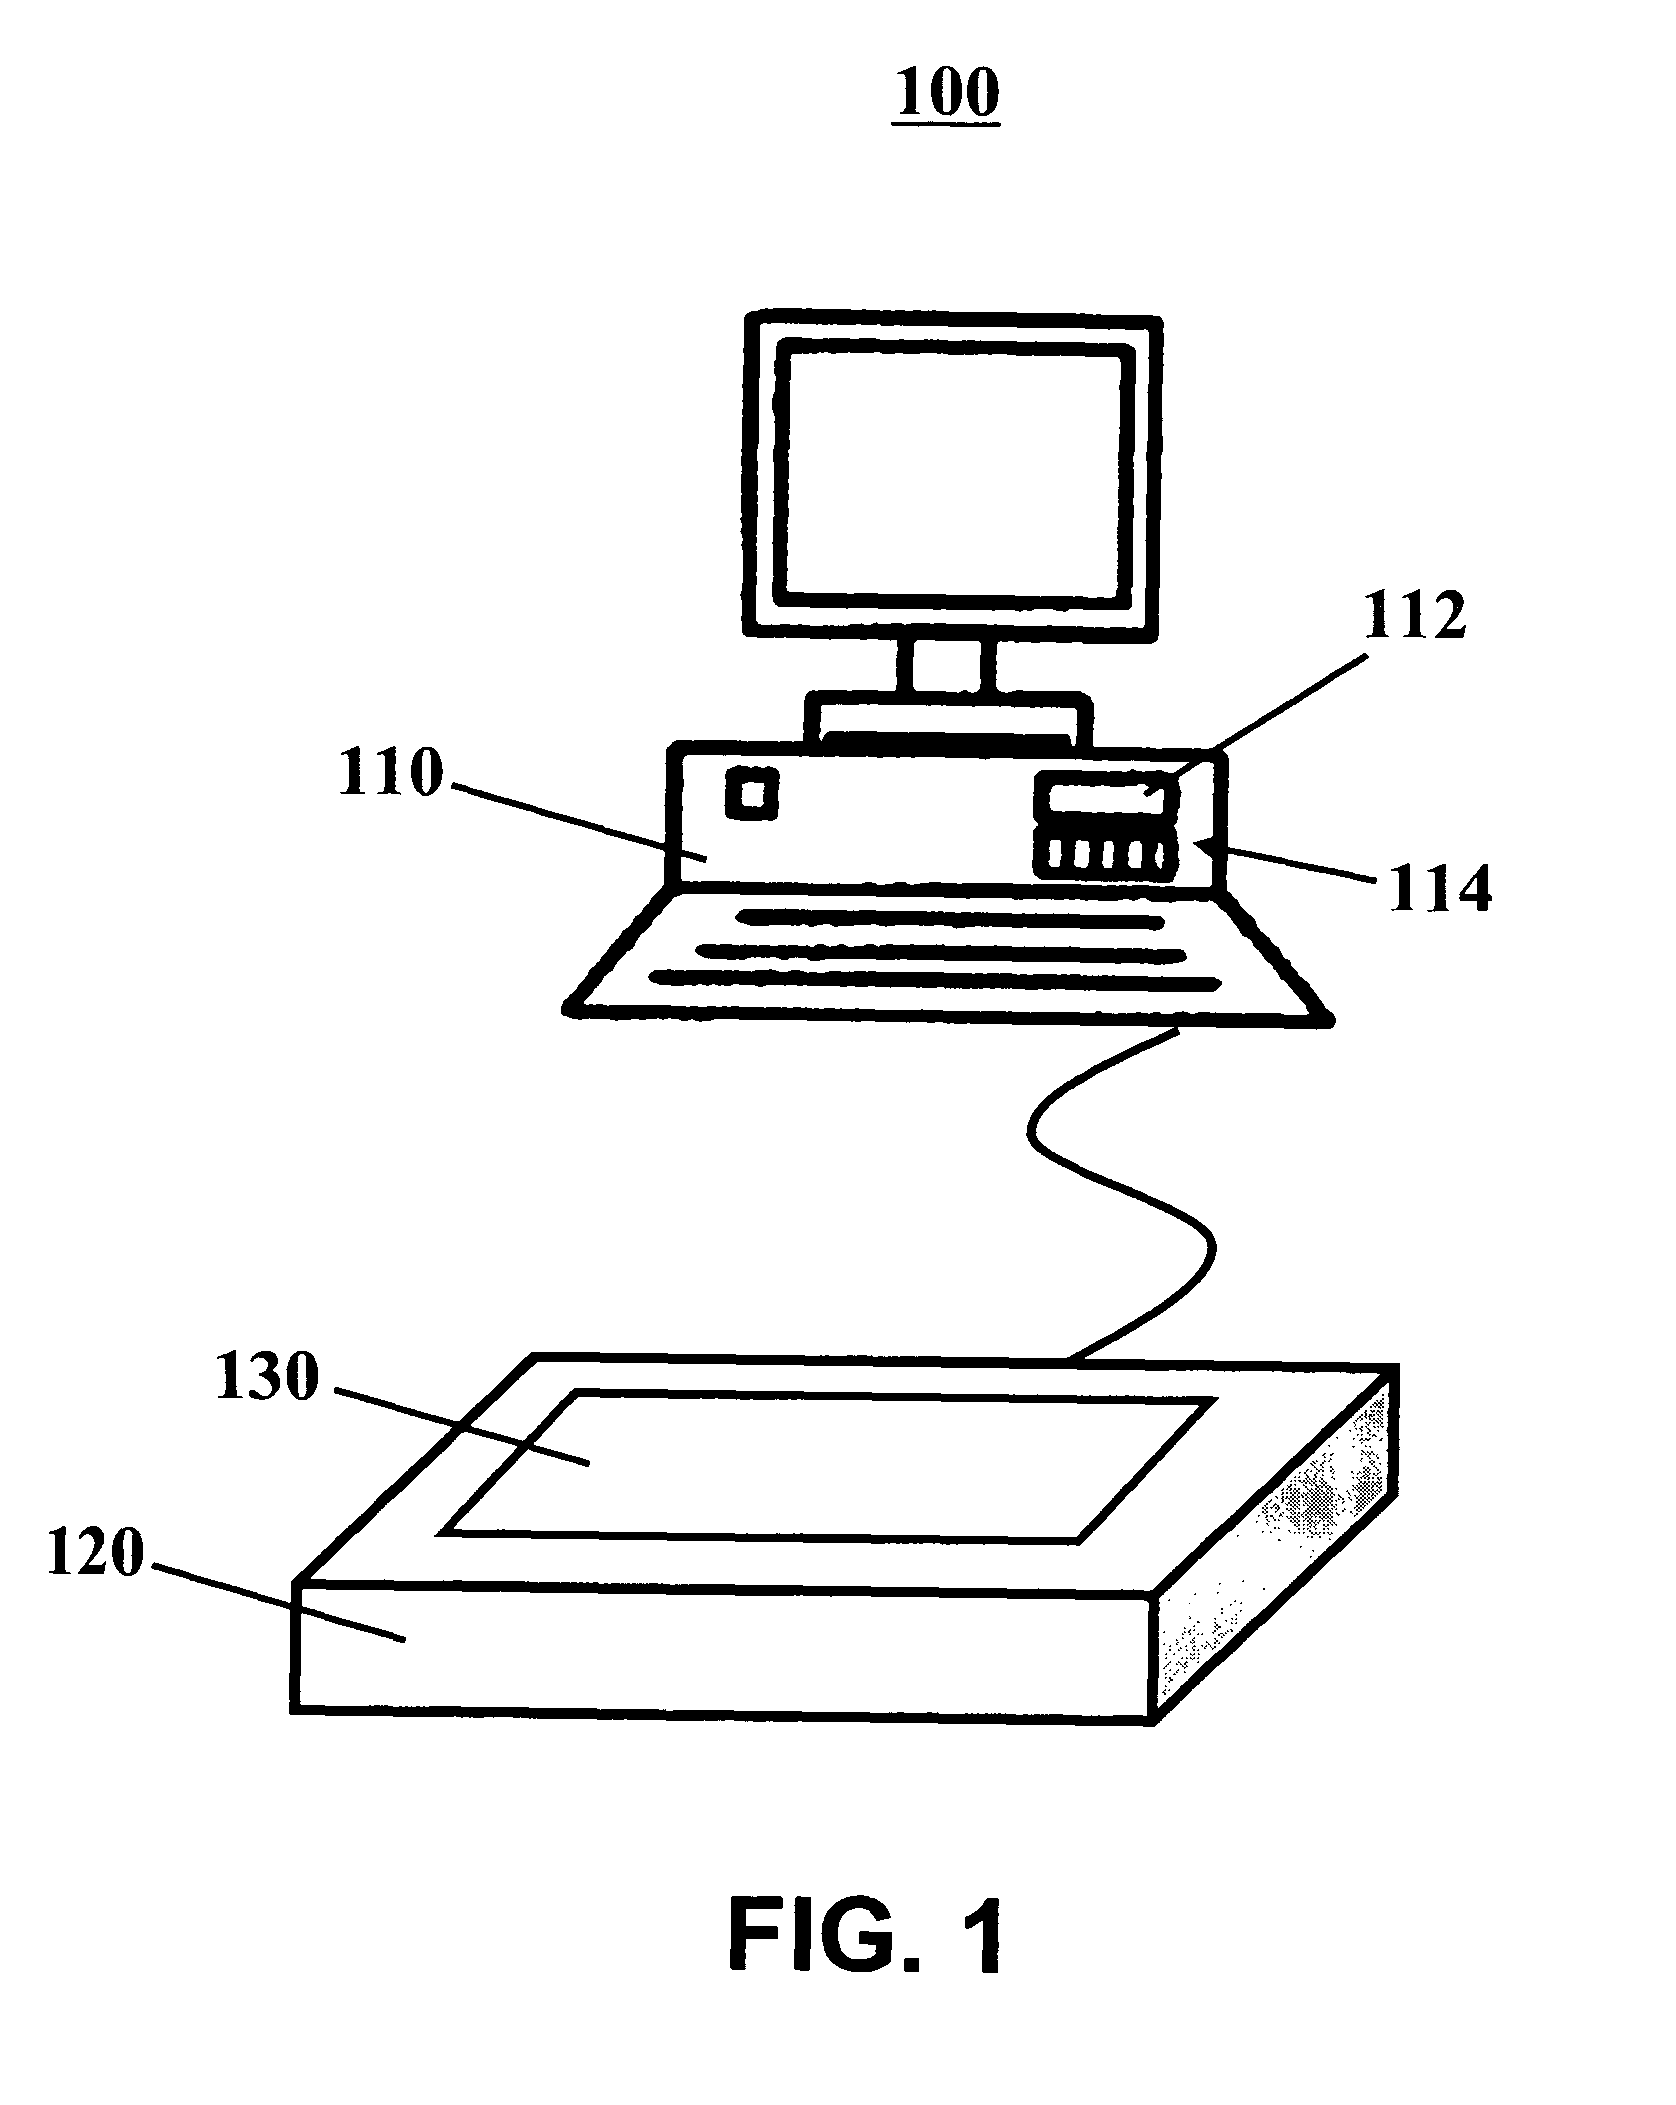 System and method for controlling copying of documents